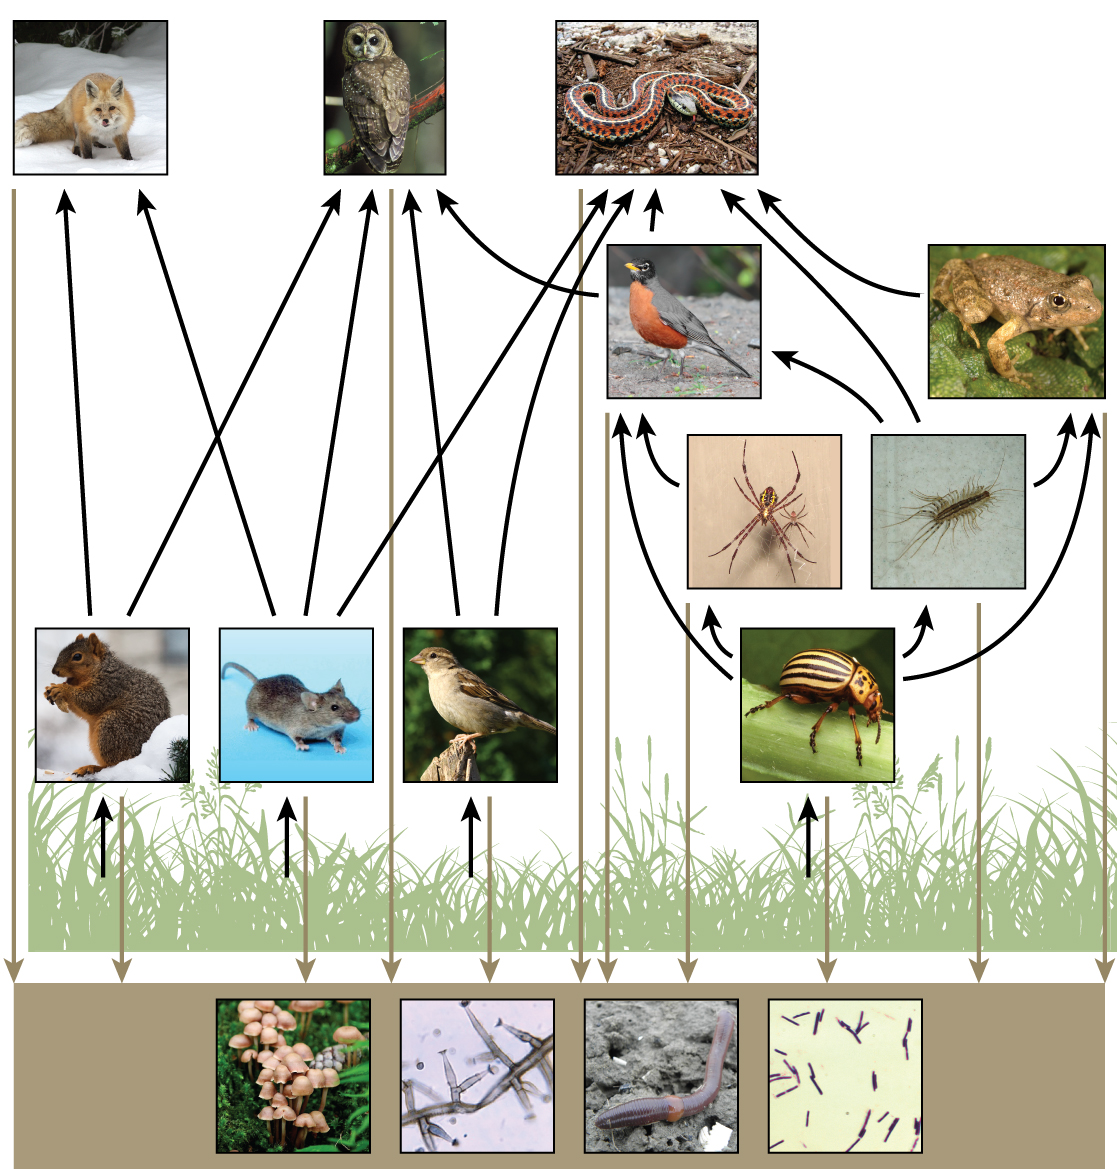 food web shows the interactions between organisms across trophic levels